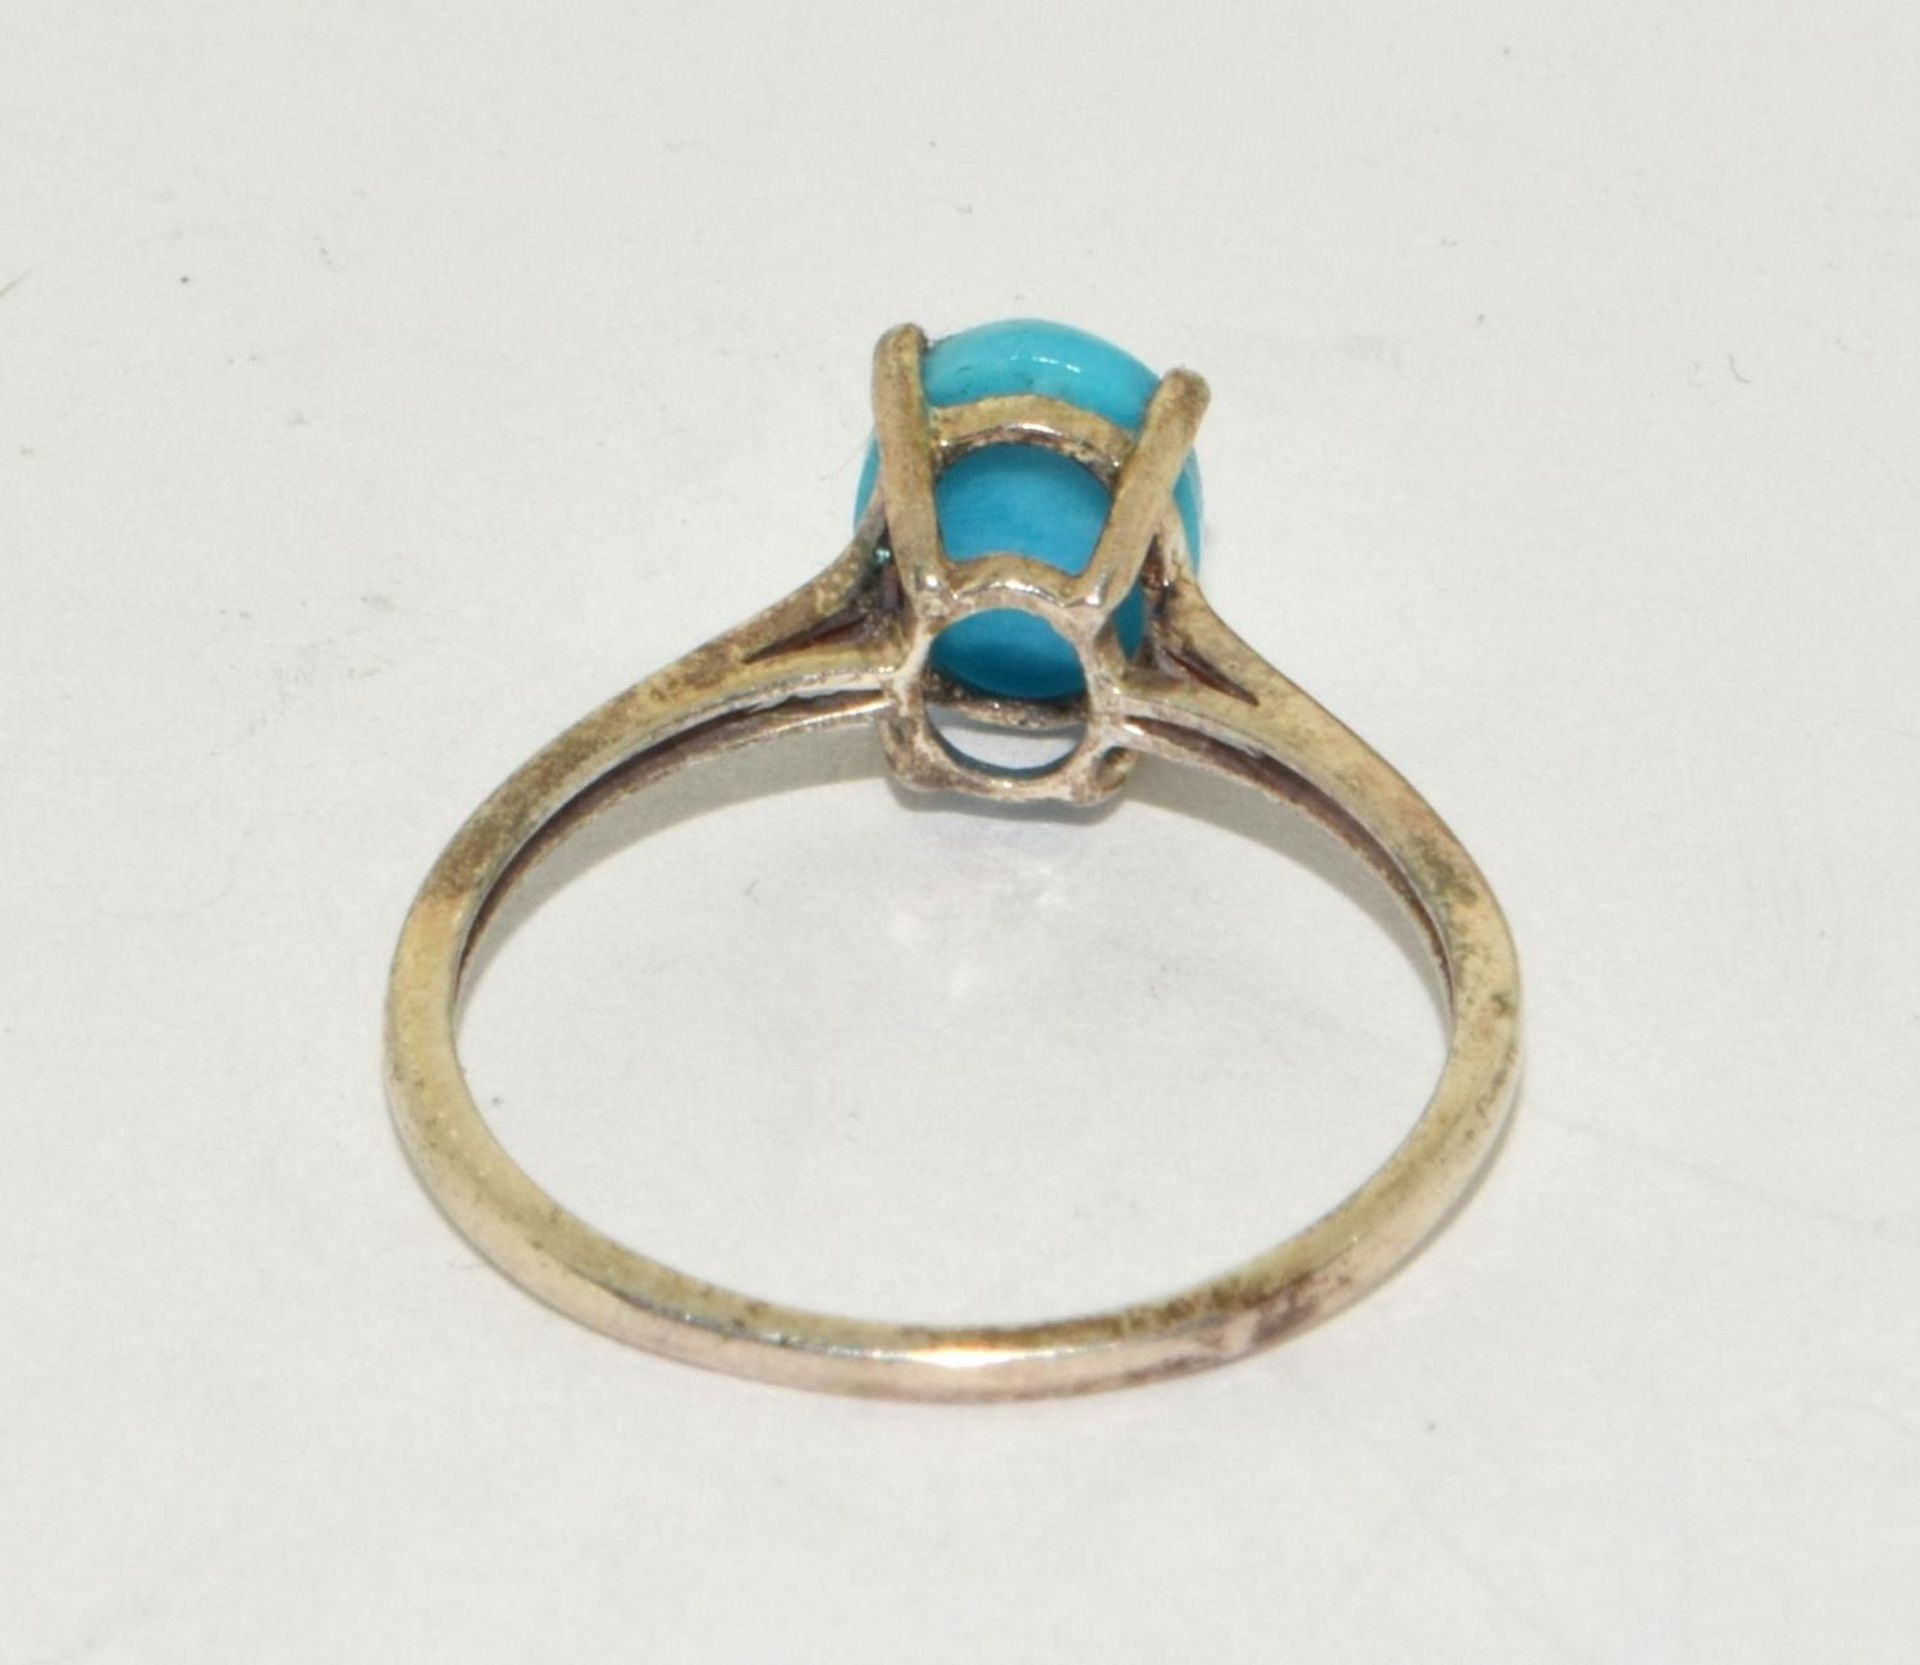 A delicate 925 silver and turquoise solitaire ring Size M 1/2. - Image 3 of 3